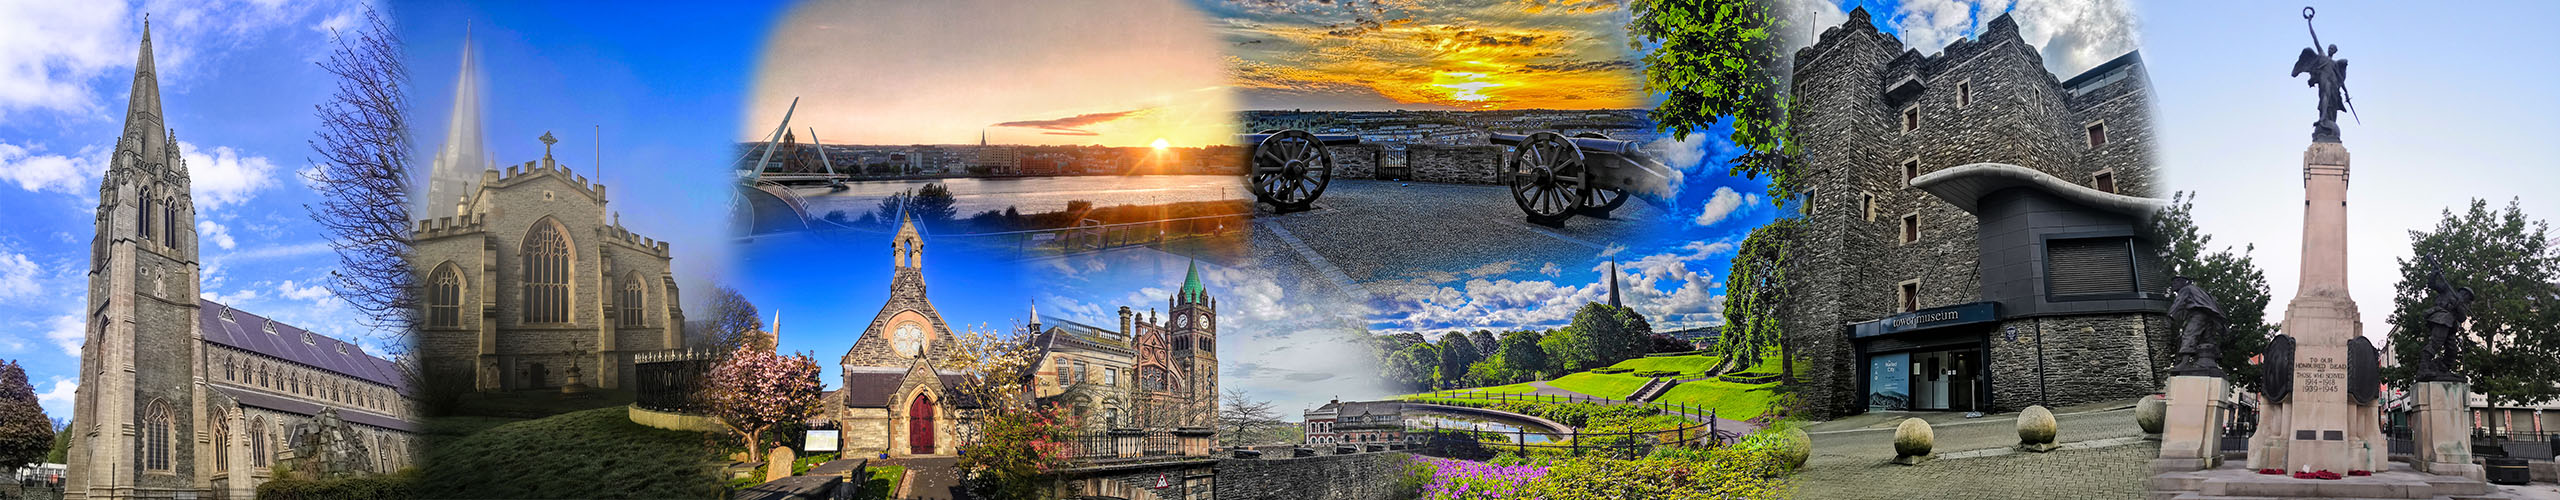 Collage of photos from across derry